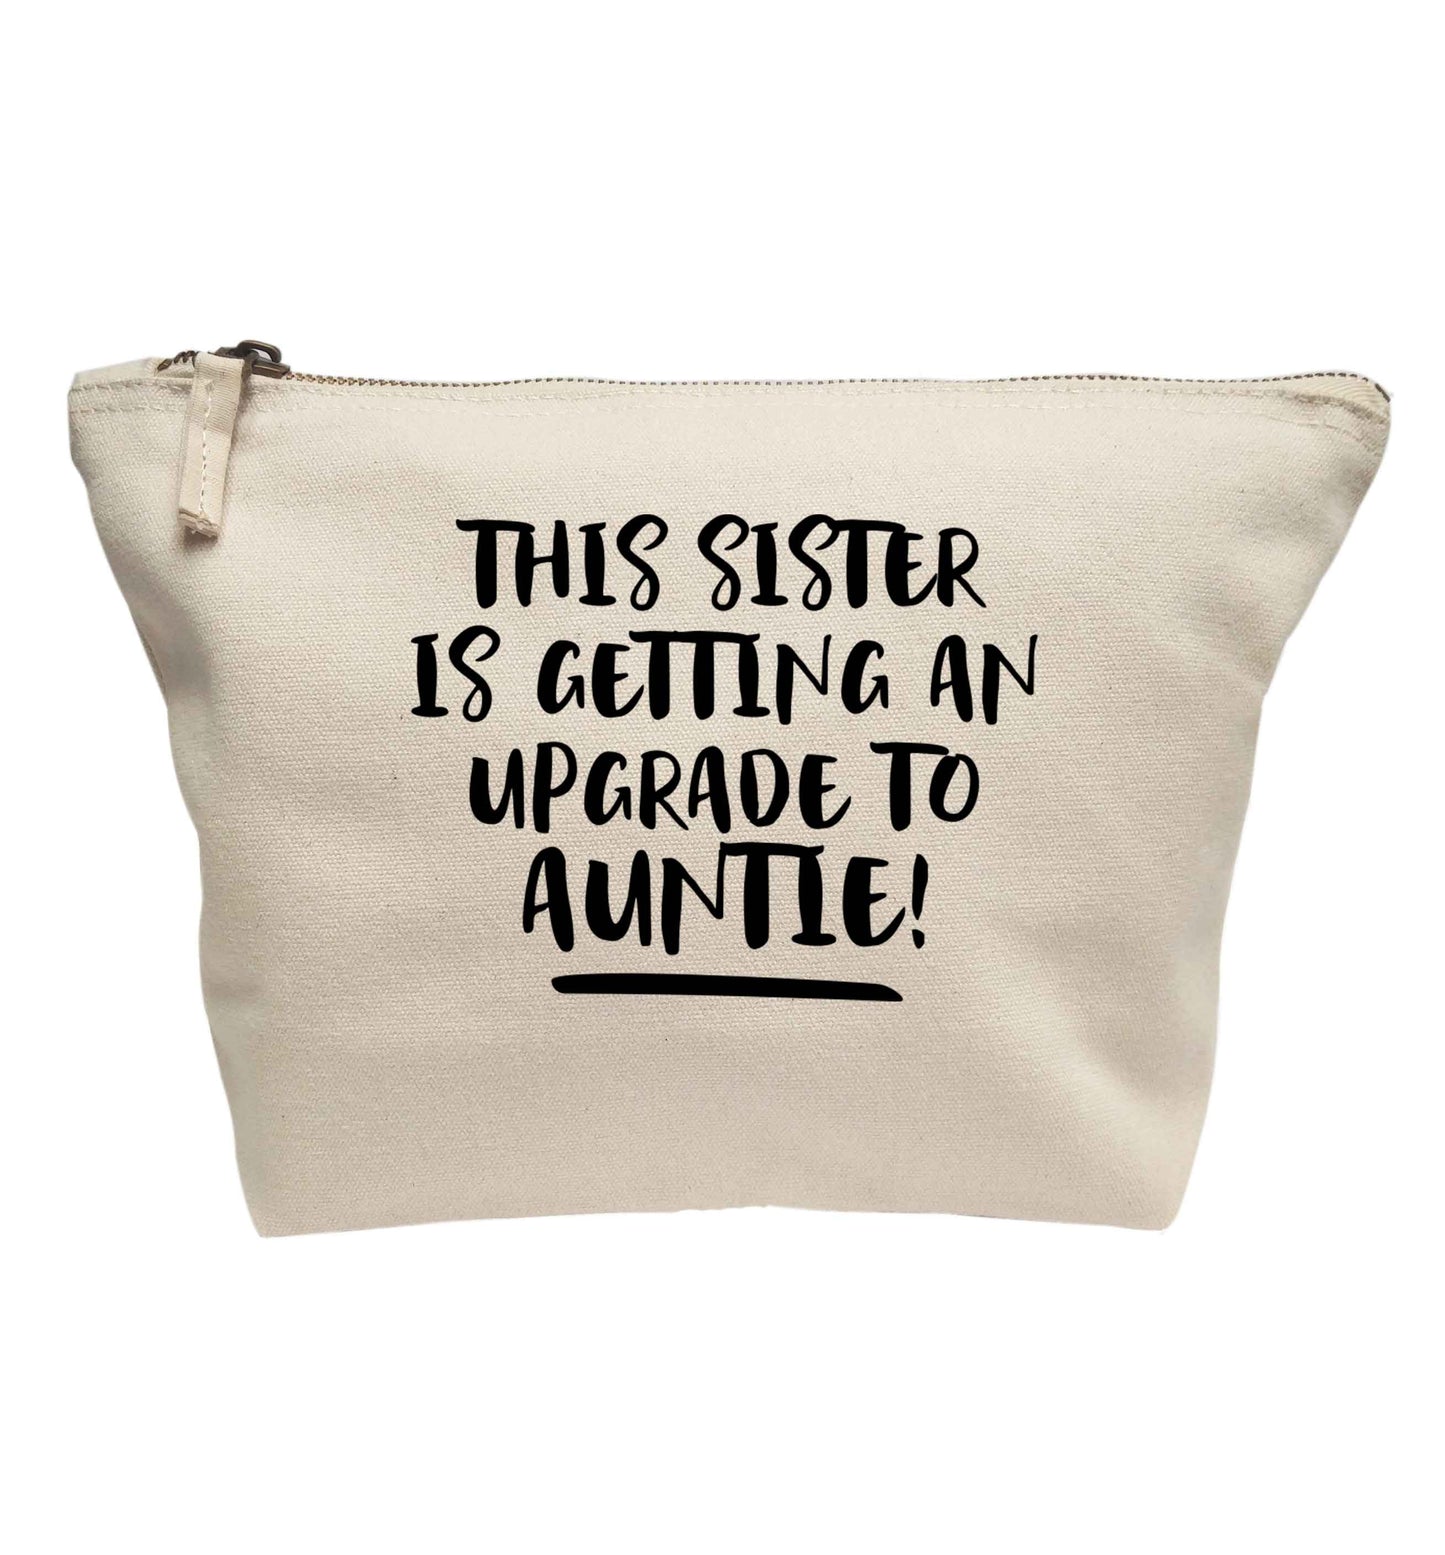 This sister is getting an upgrade to auntie! | makeup / wash bag